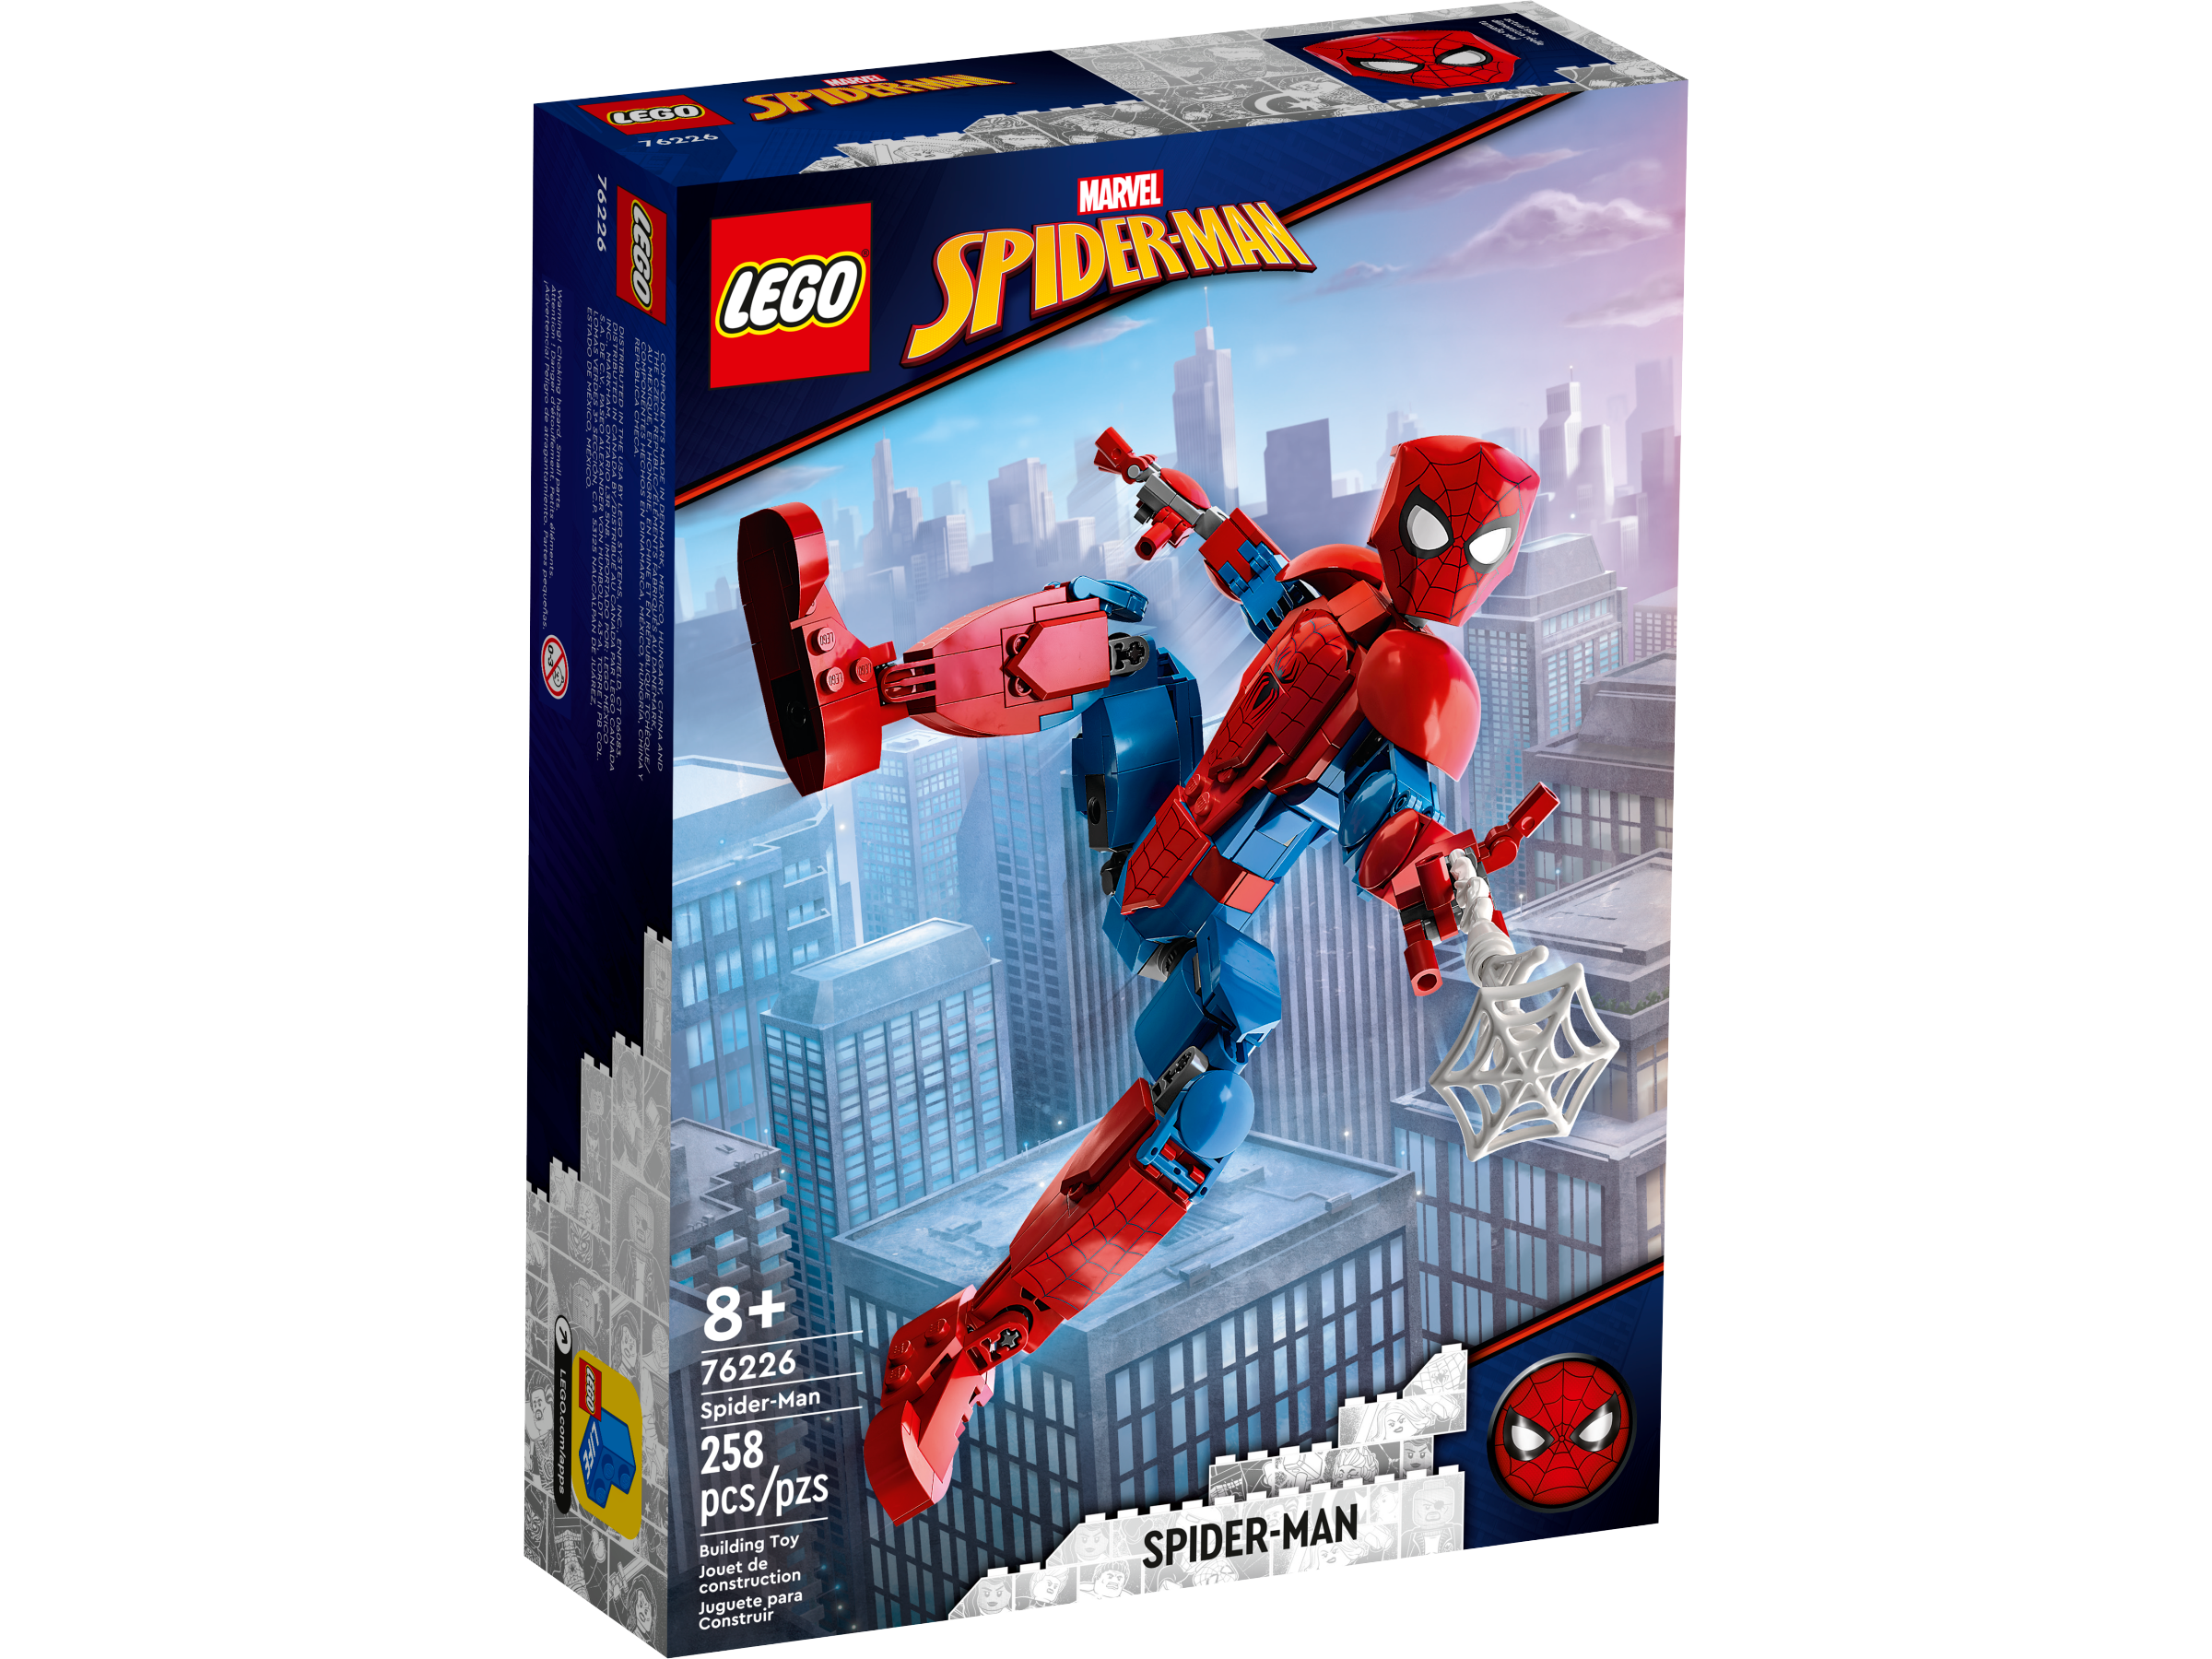 LEGO Super Heroes Spider-Man Figure 76226 by LEGO Systems Inc